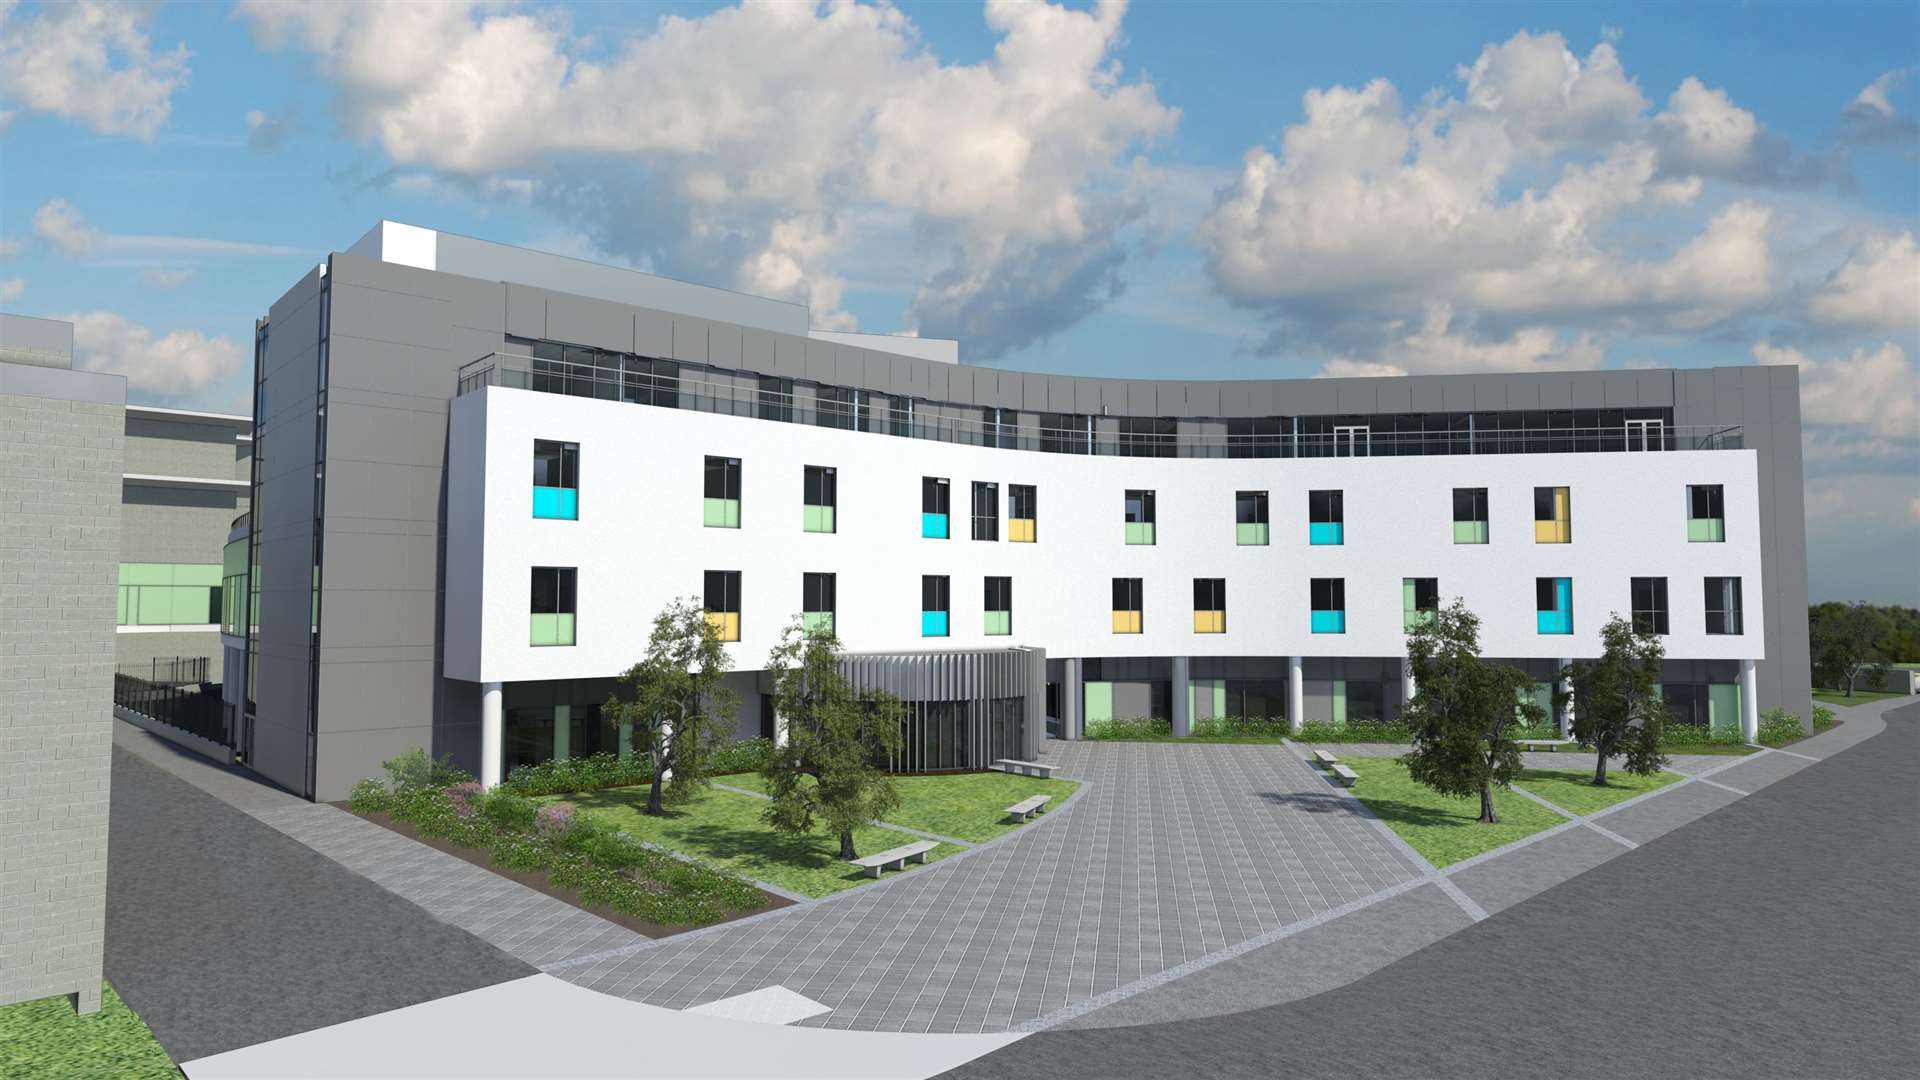 NHS Grampian has a significant number of building projects under way, including The Baird and ANCHOR project.